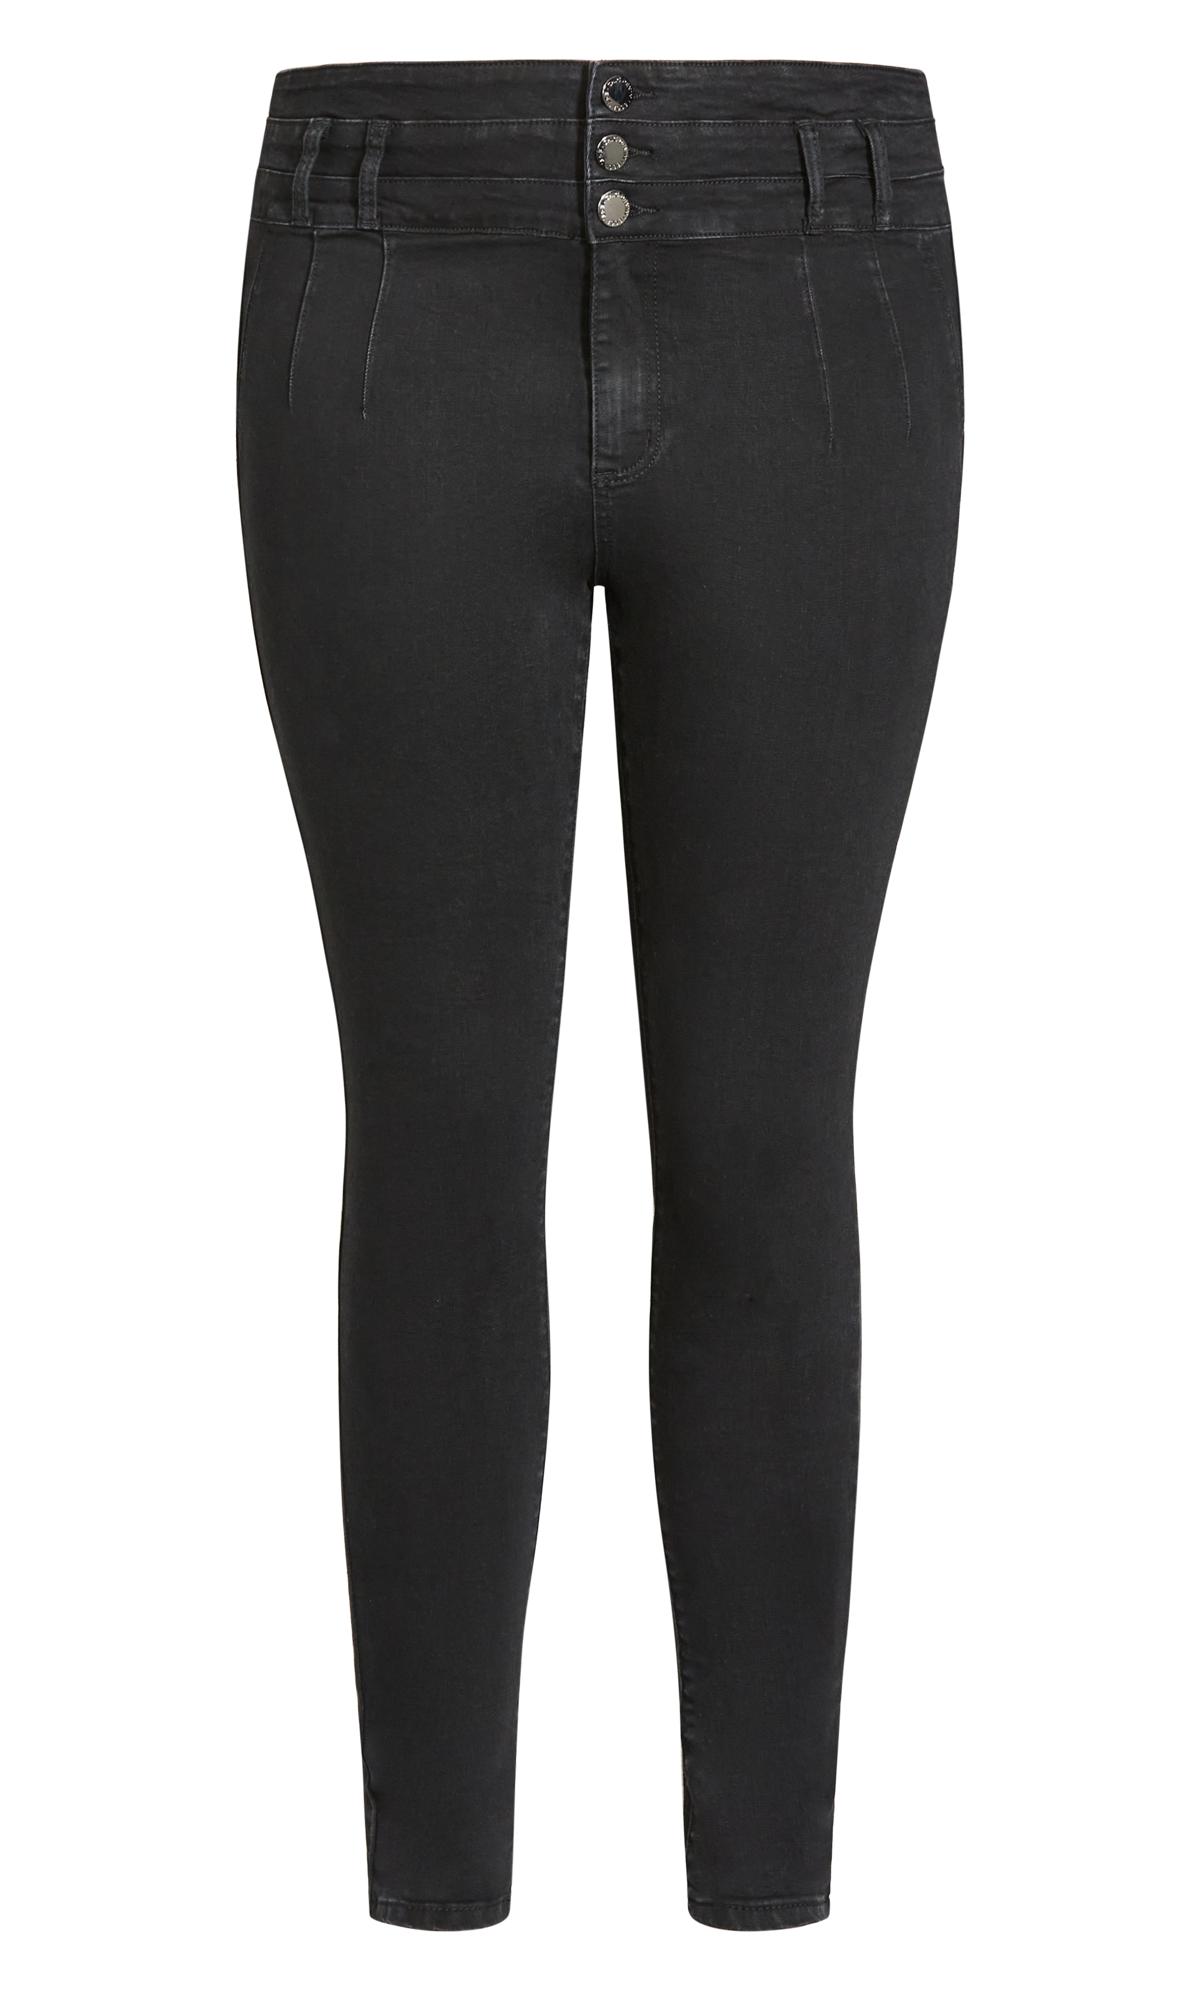 City Chic Black High Waisted Skinny Jeans 2